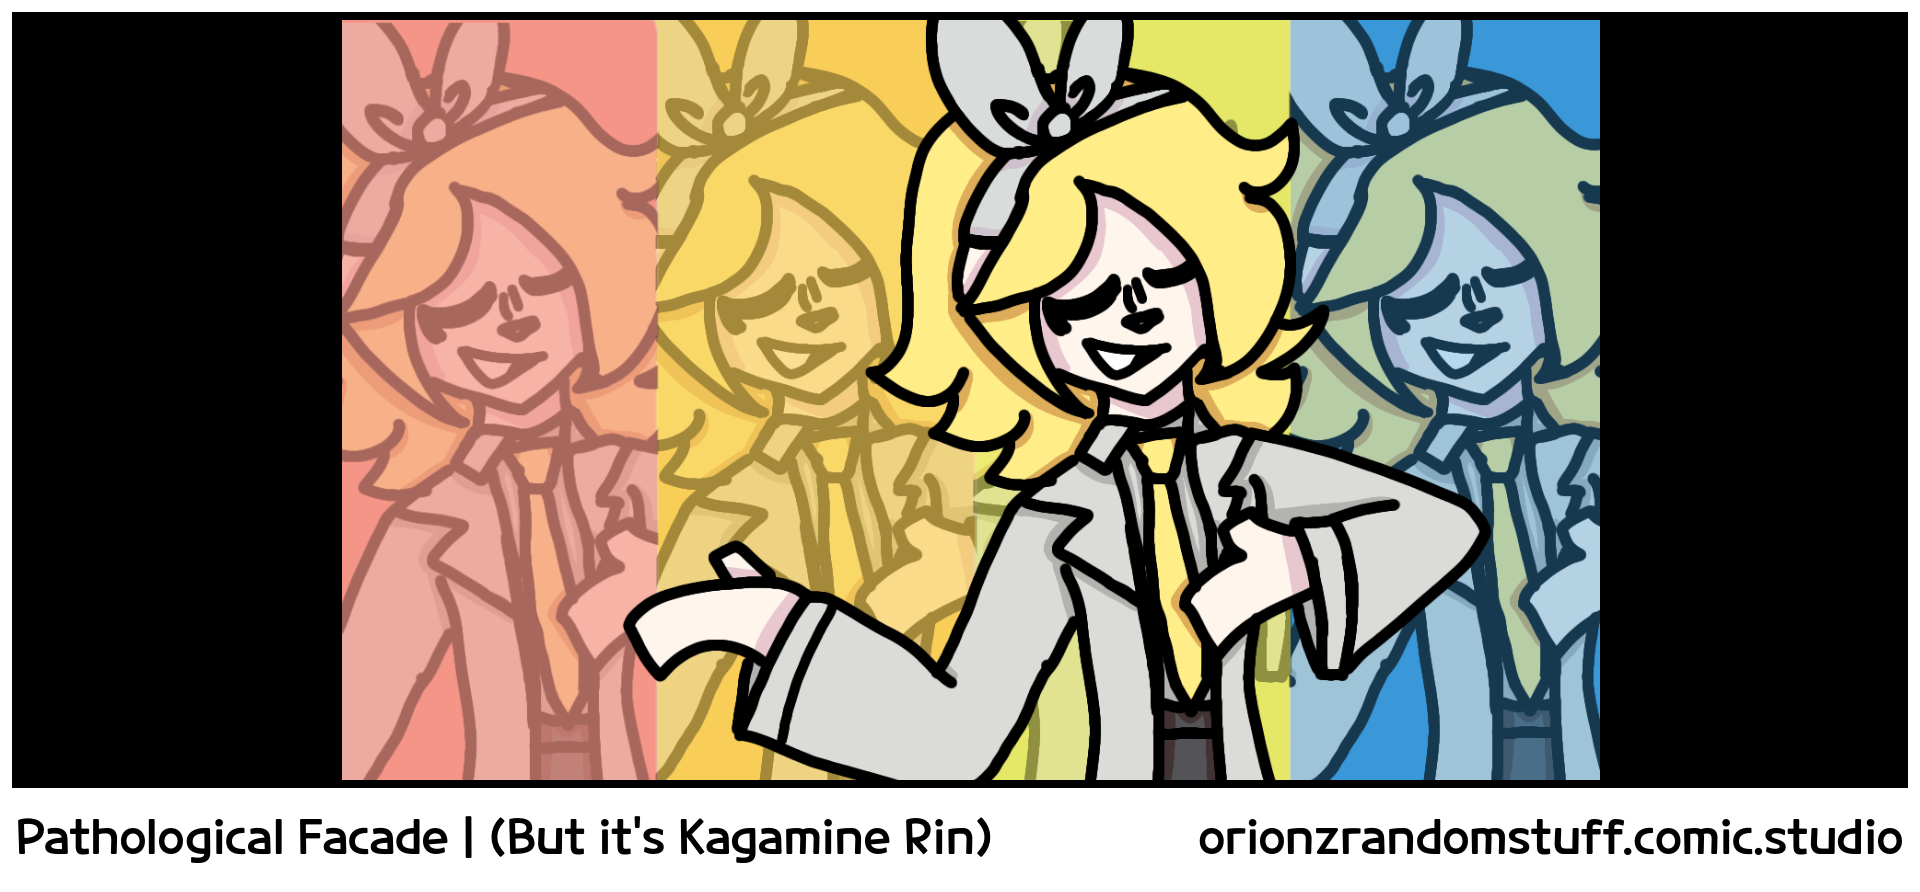 Pathological Facade | (But it's Kagamine Rin)